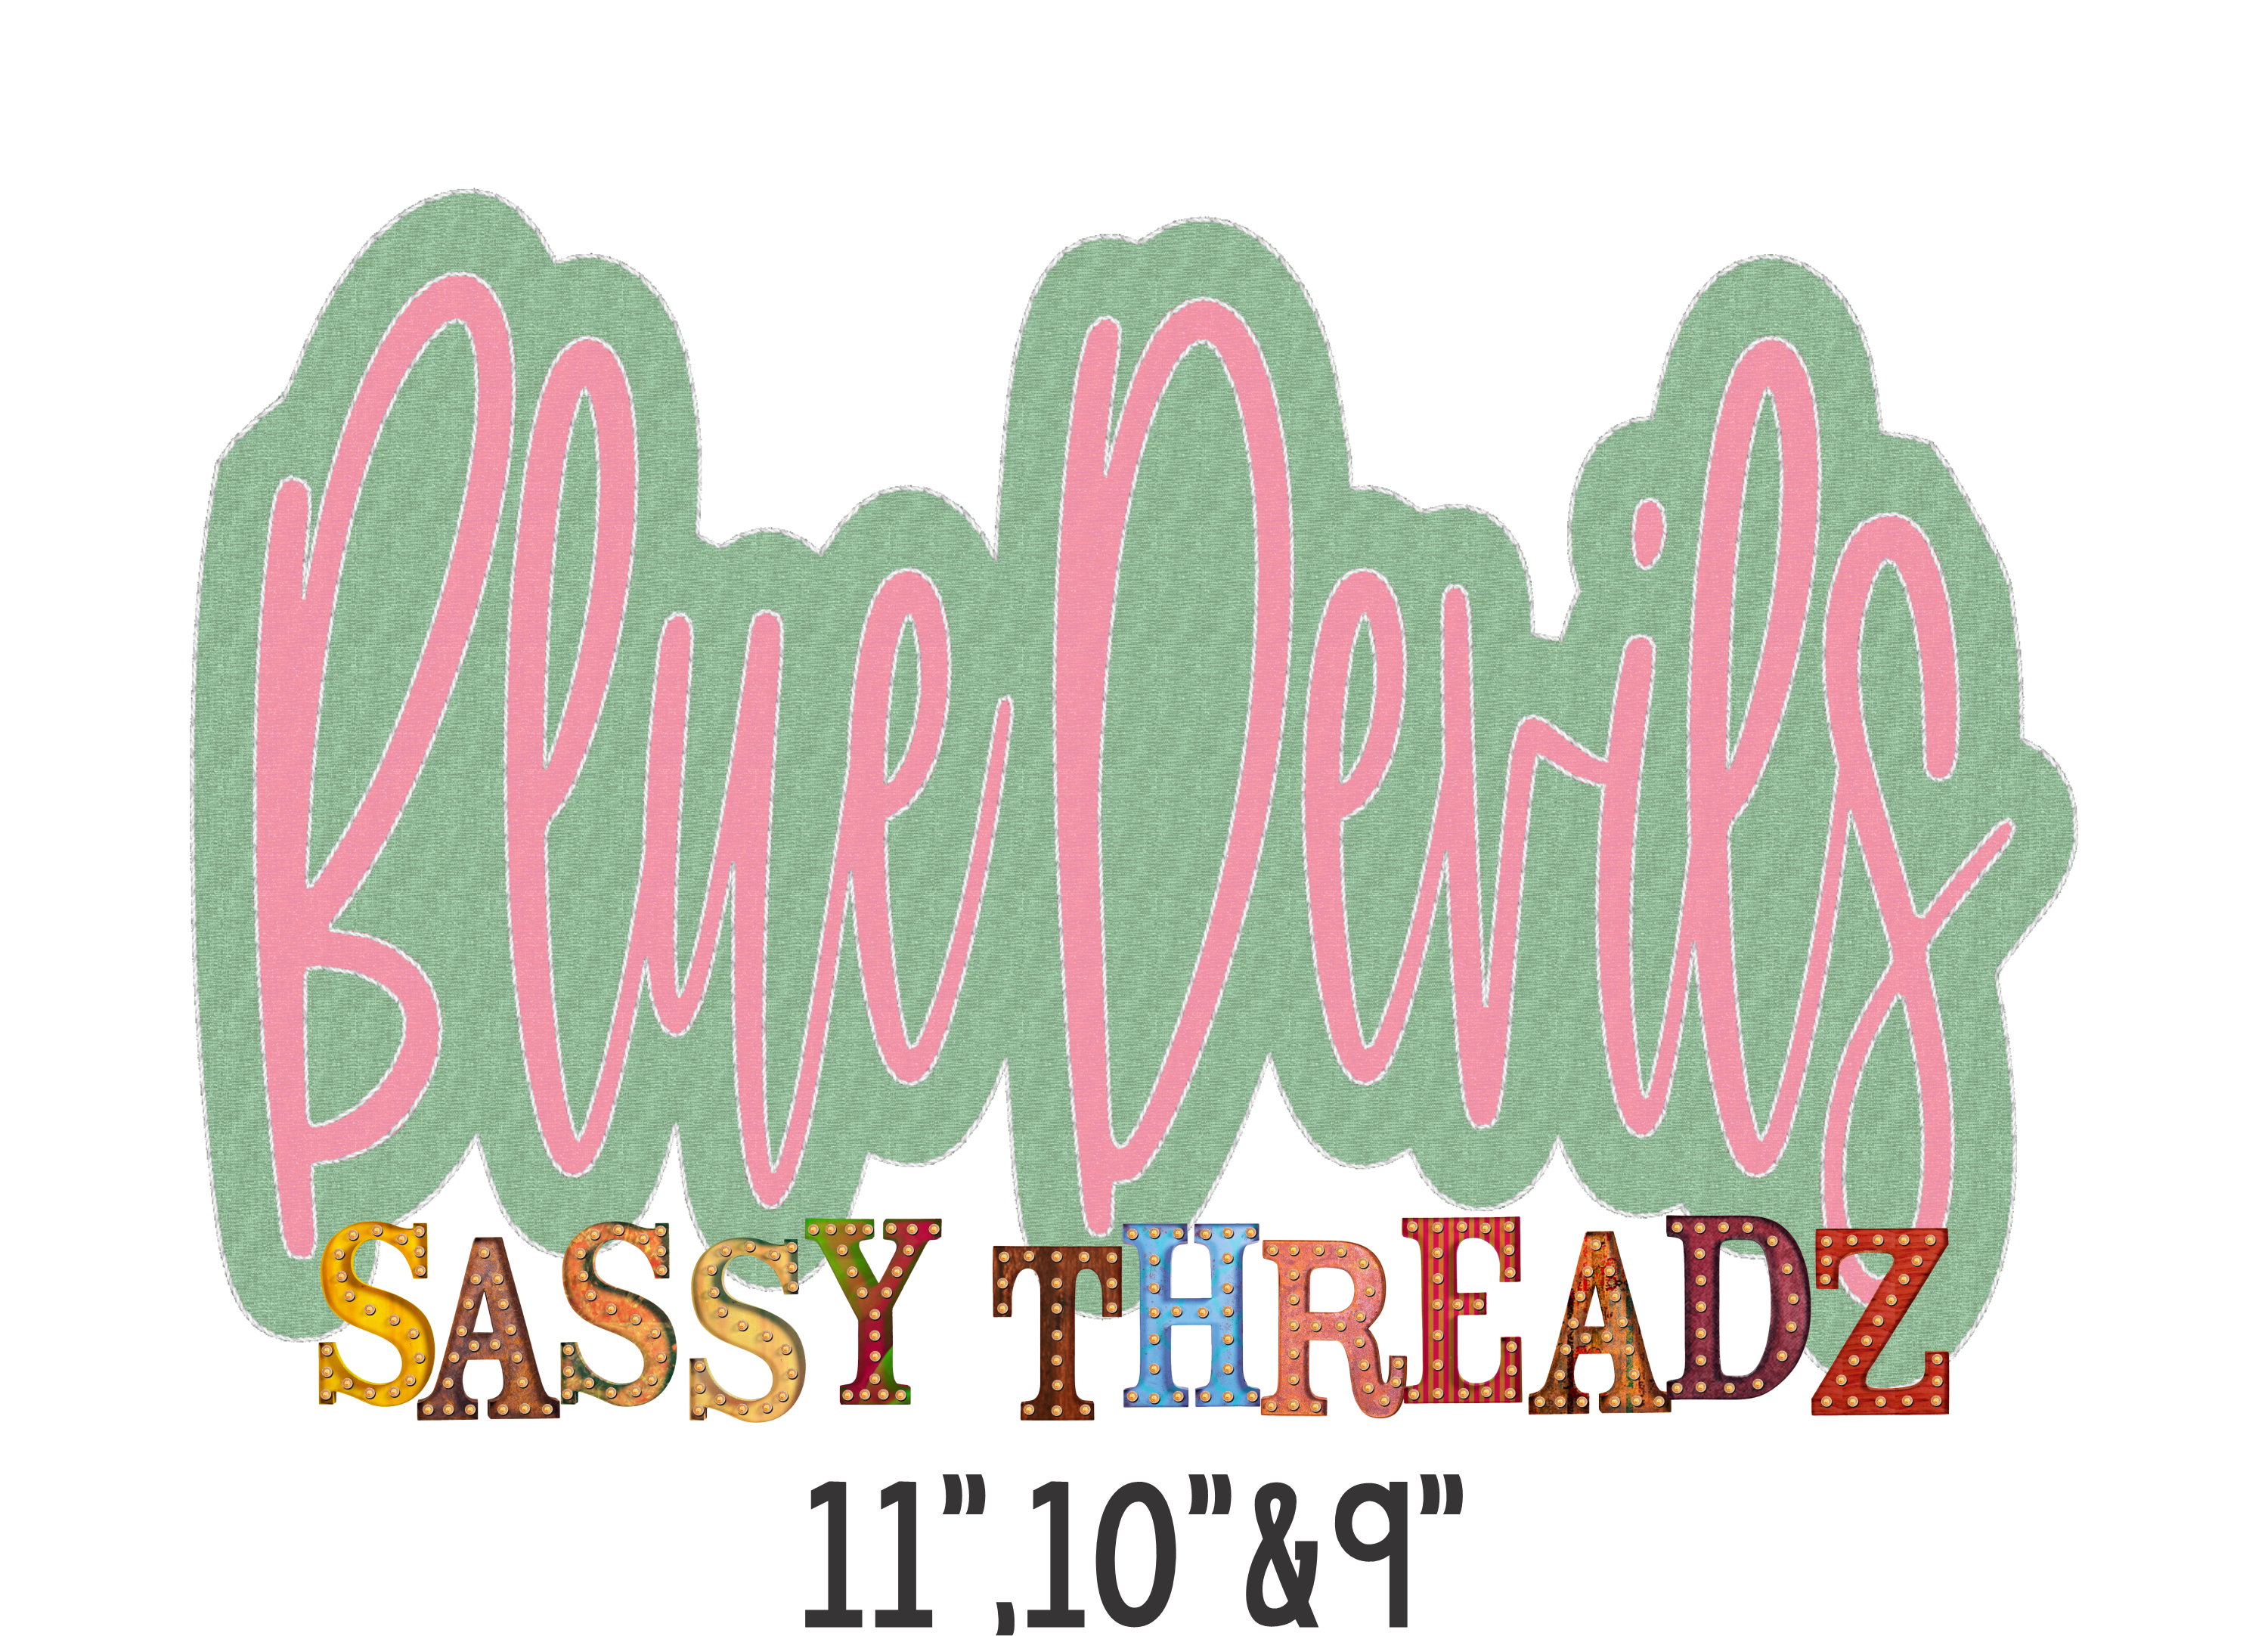 Blue Devils Double Stacked Script Embroidery Download - Sassy Threadz